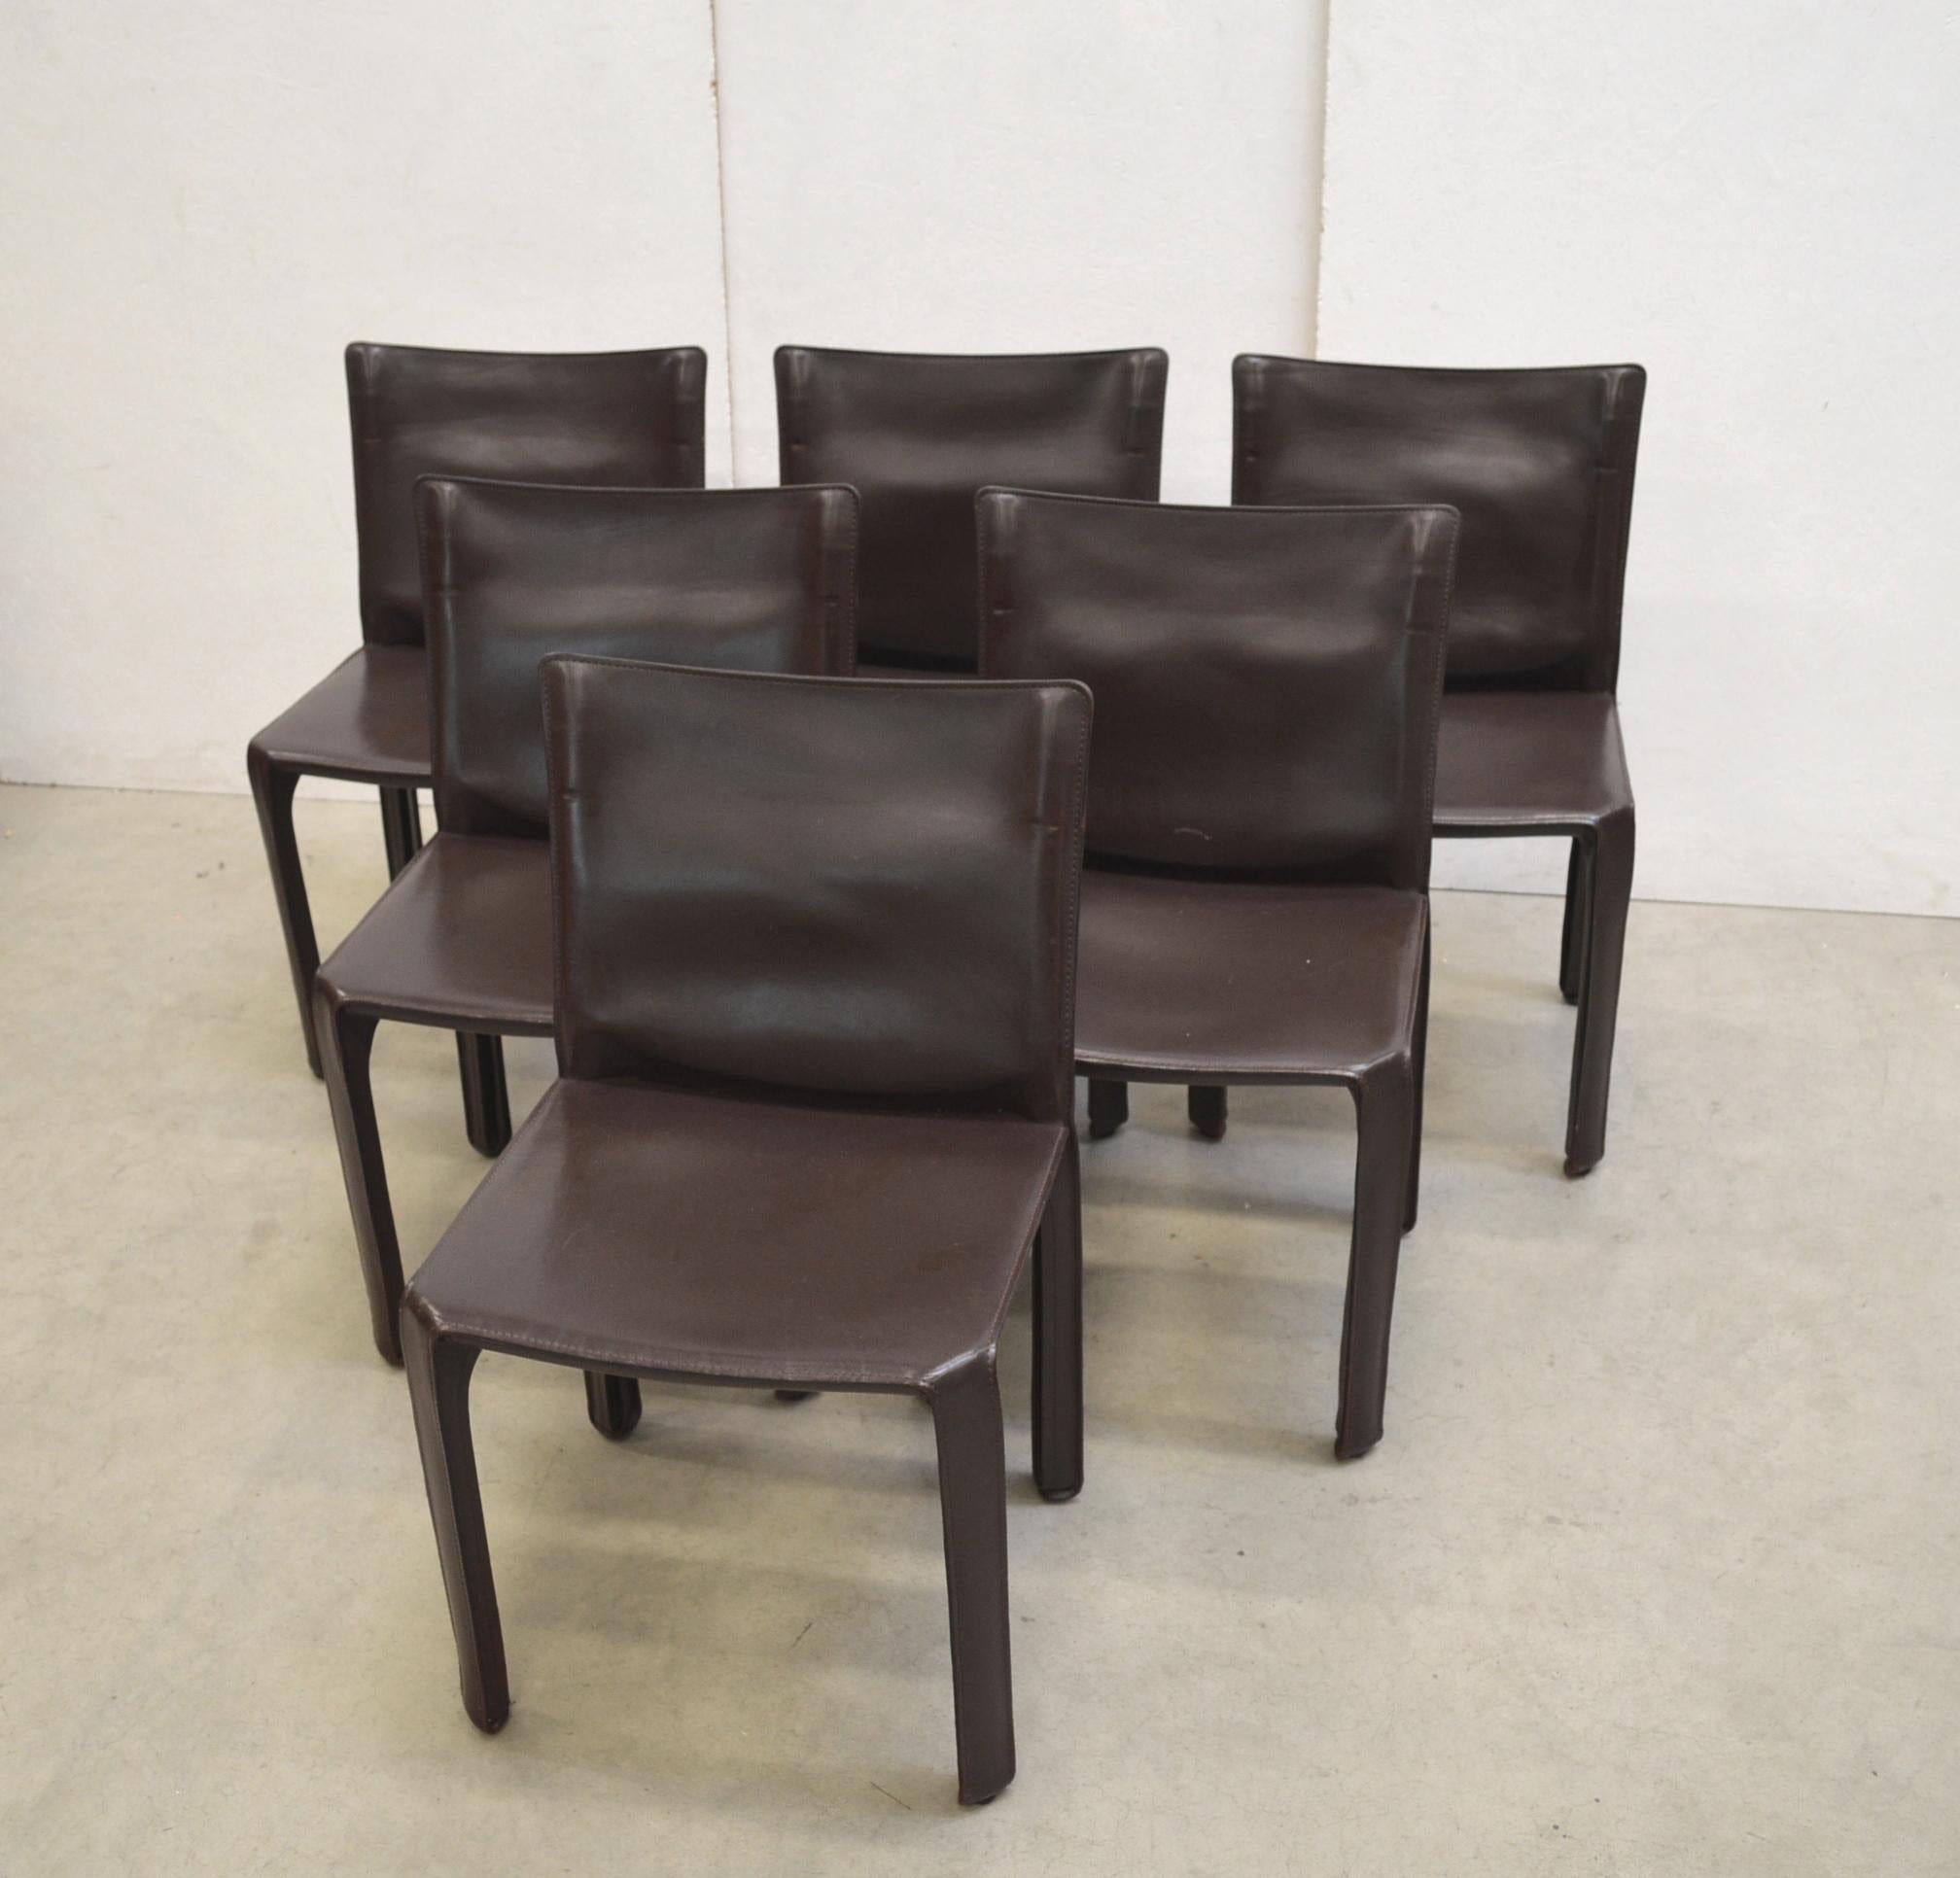 Italian Set of 6 Cab Chair 412 by Mario Bellini for Cassina Chocolate Brown Leather